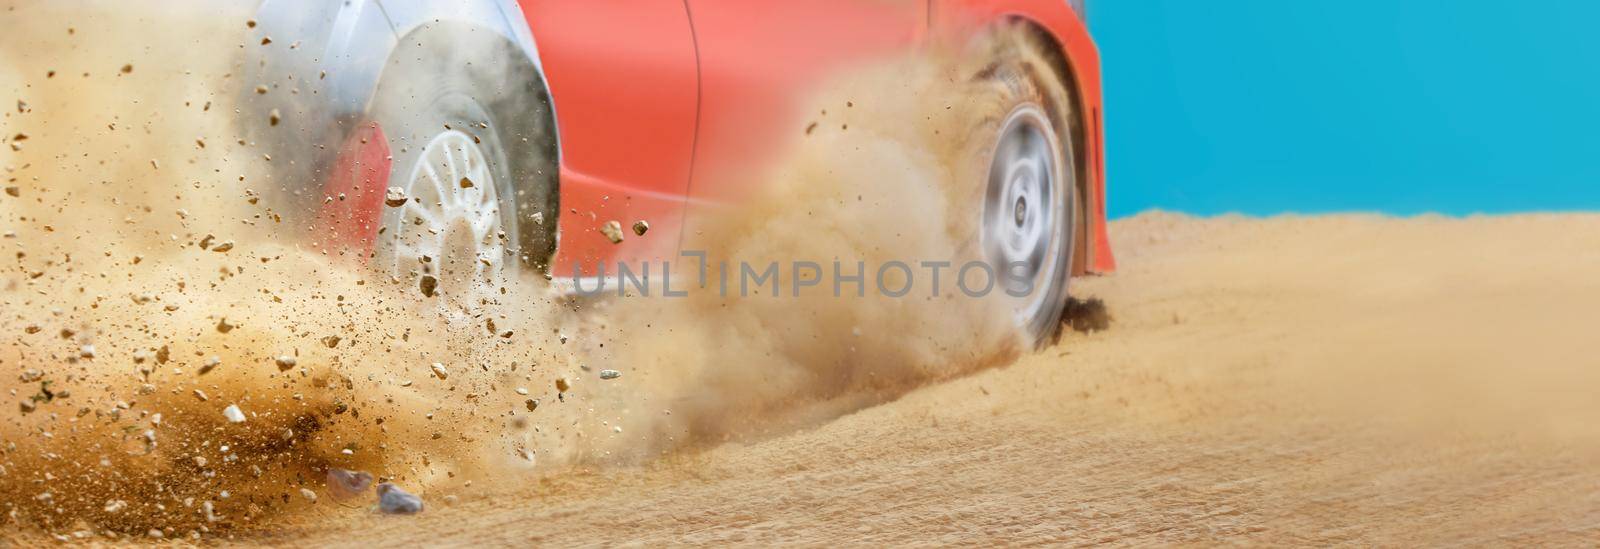 Gravel splashing from rally race car drift on track. by toa55